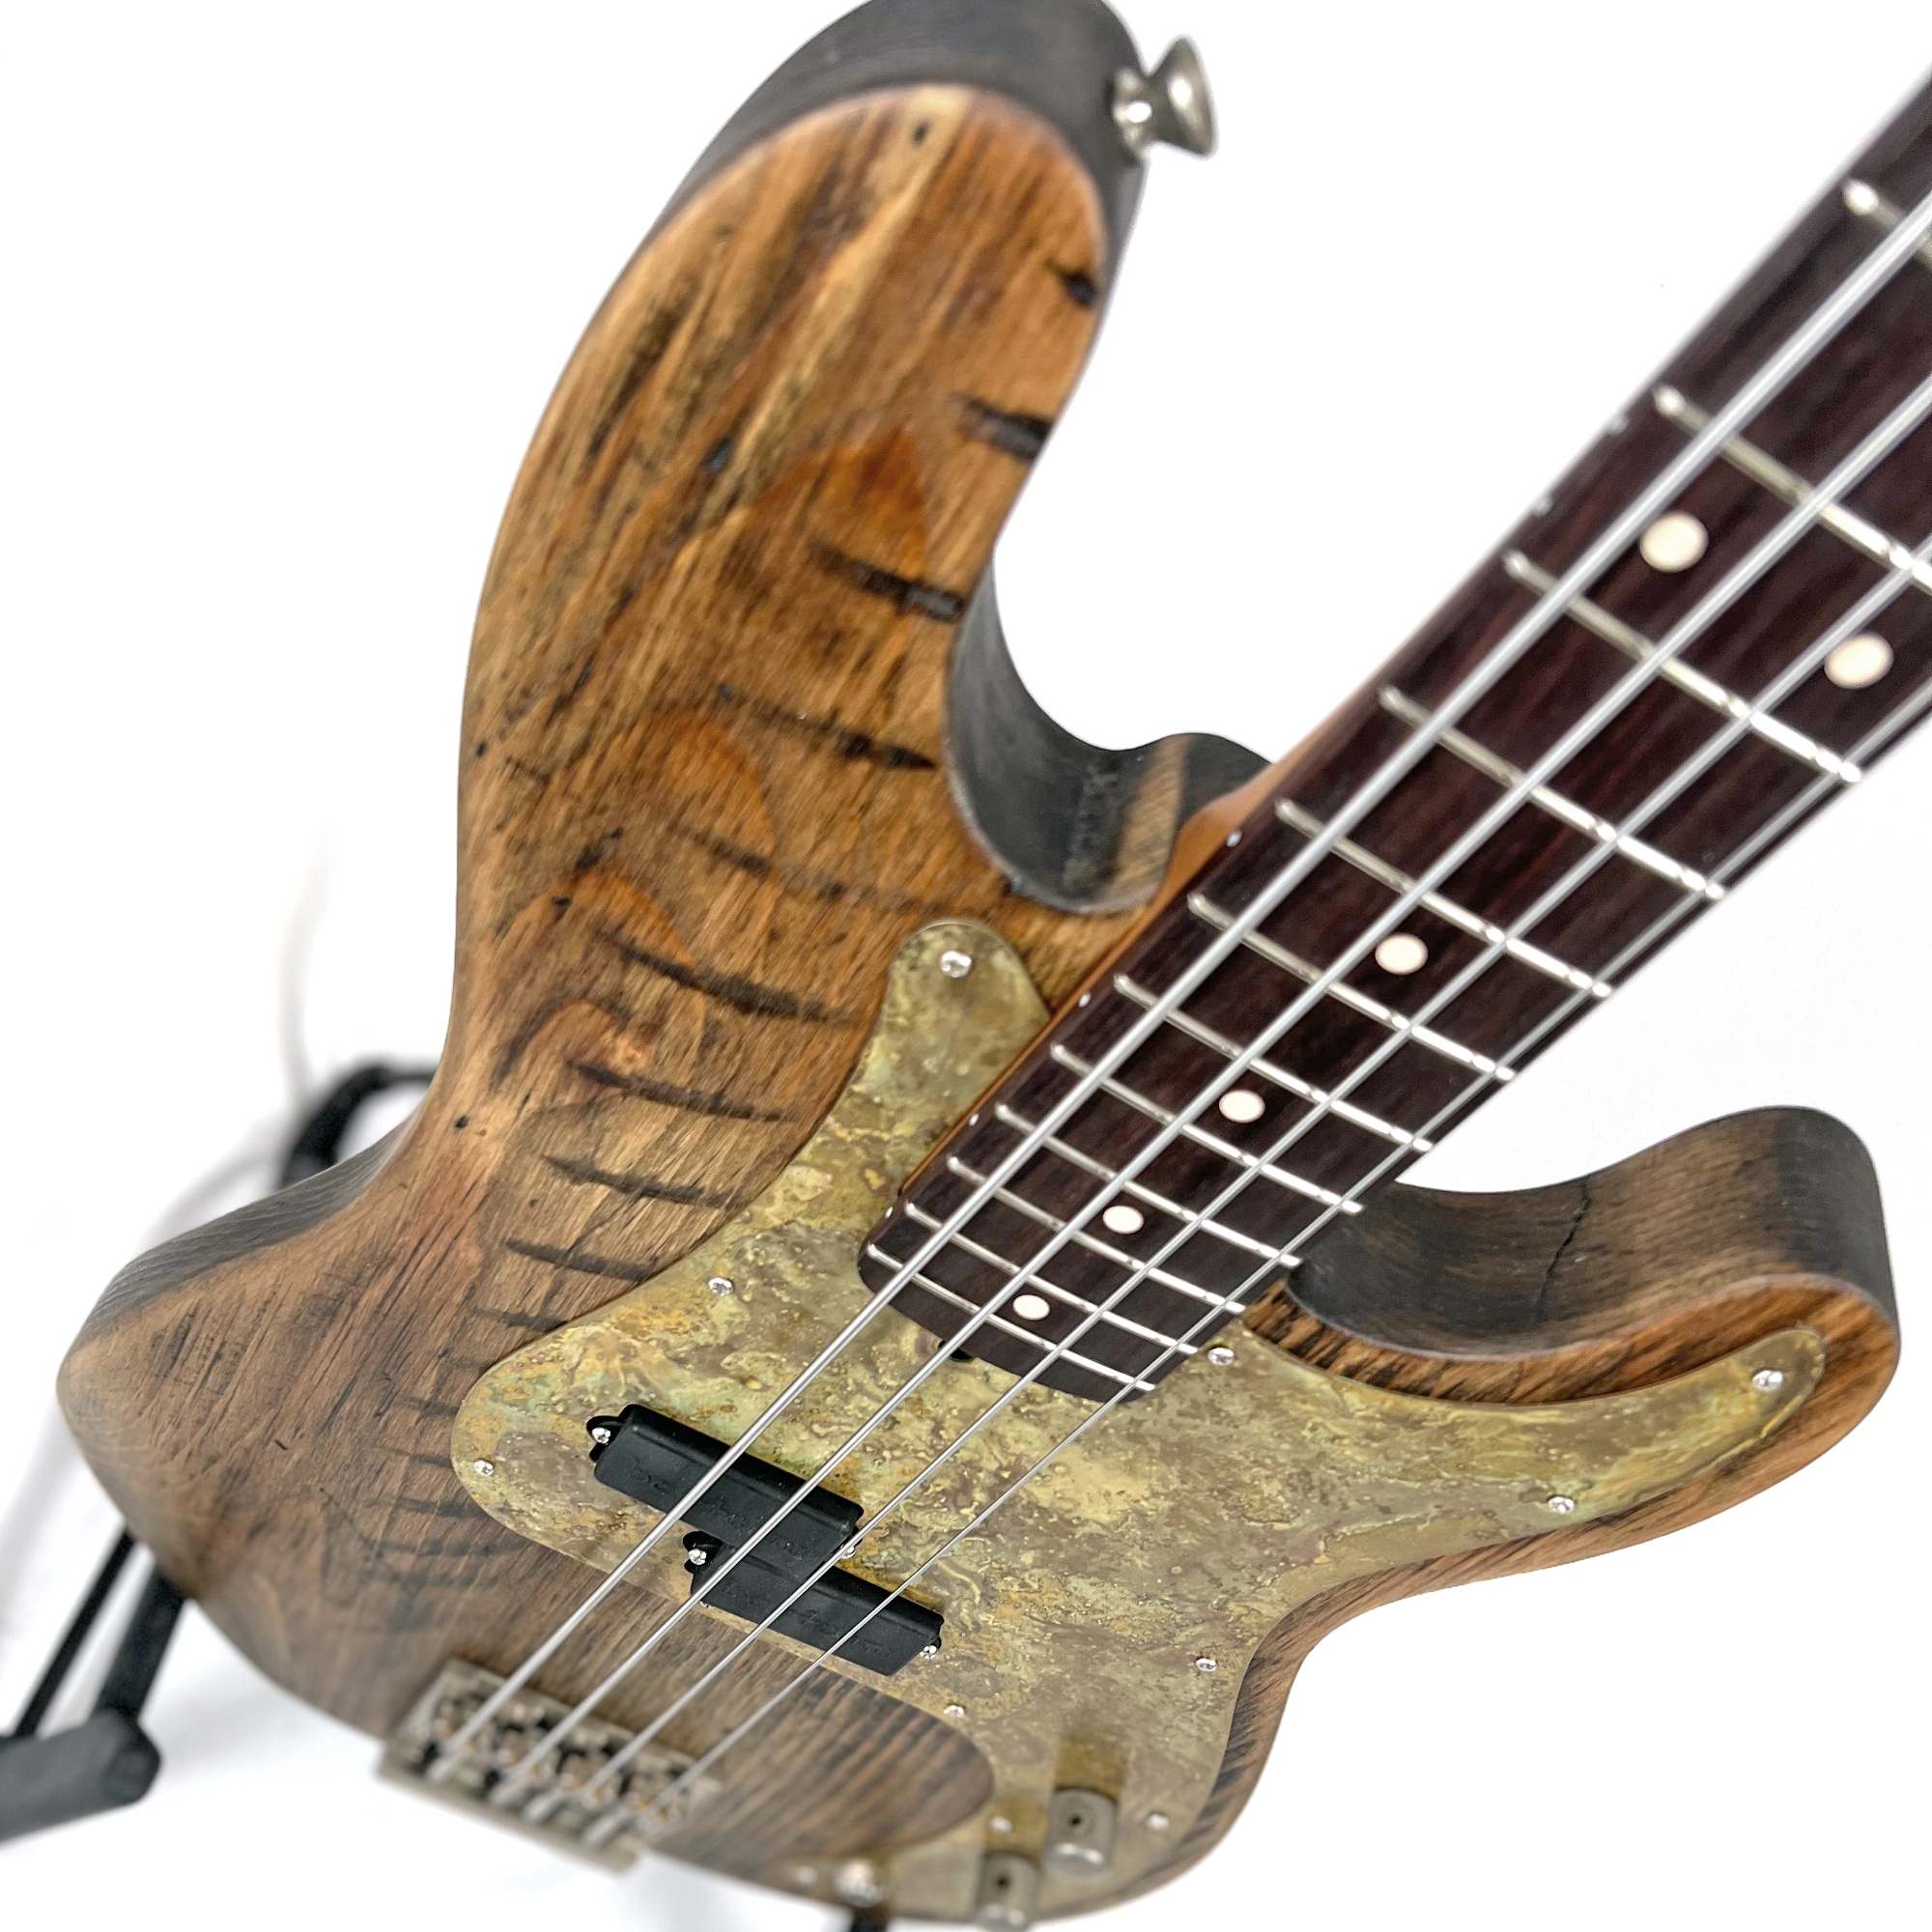 Closeup of an Offbeat Guitars Pamela P 34" Long-Scale Bass in Barn Brown on Distressed Pine with a Bartolini Pickup